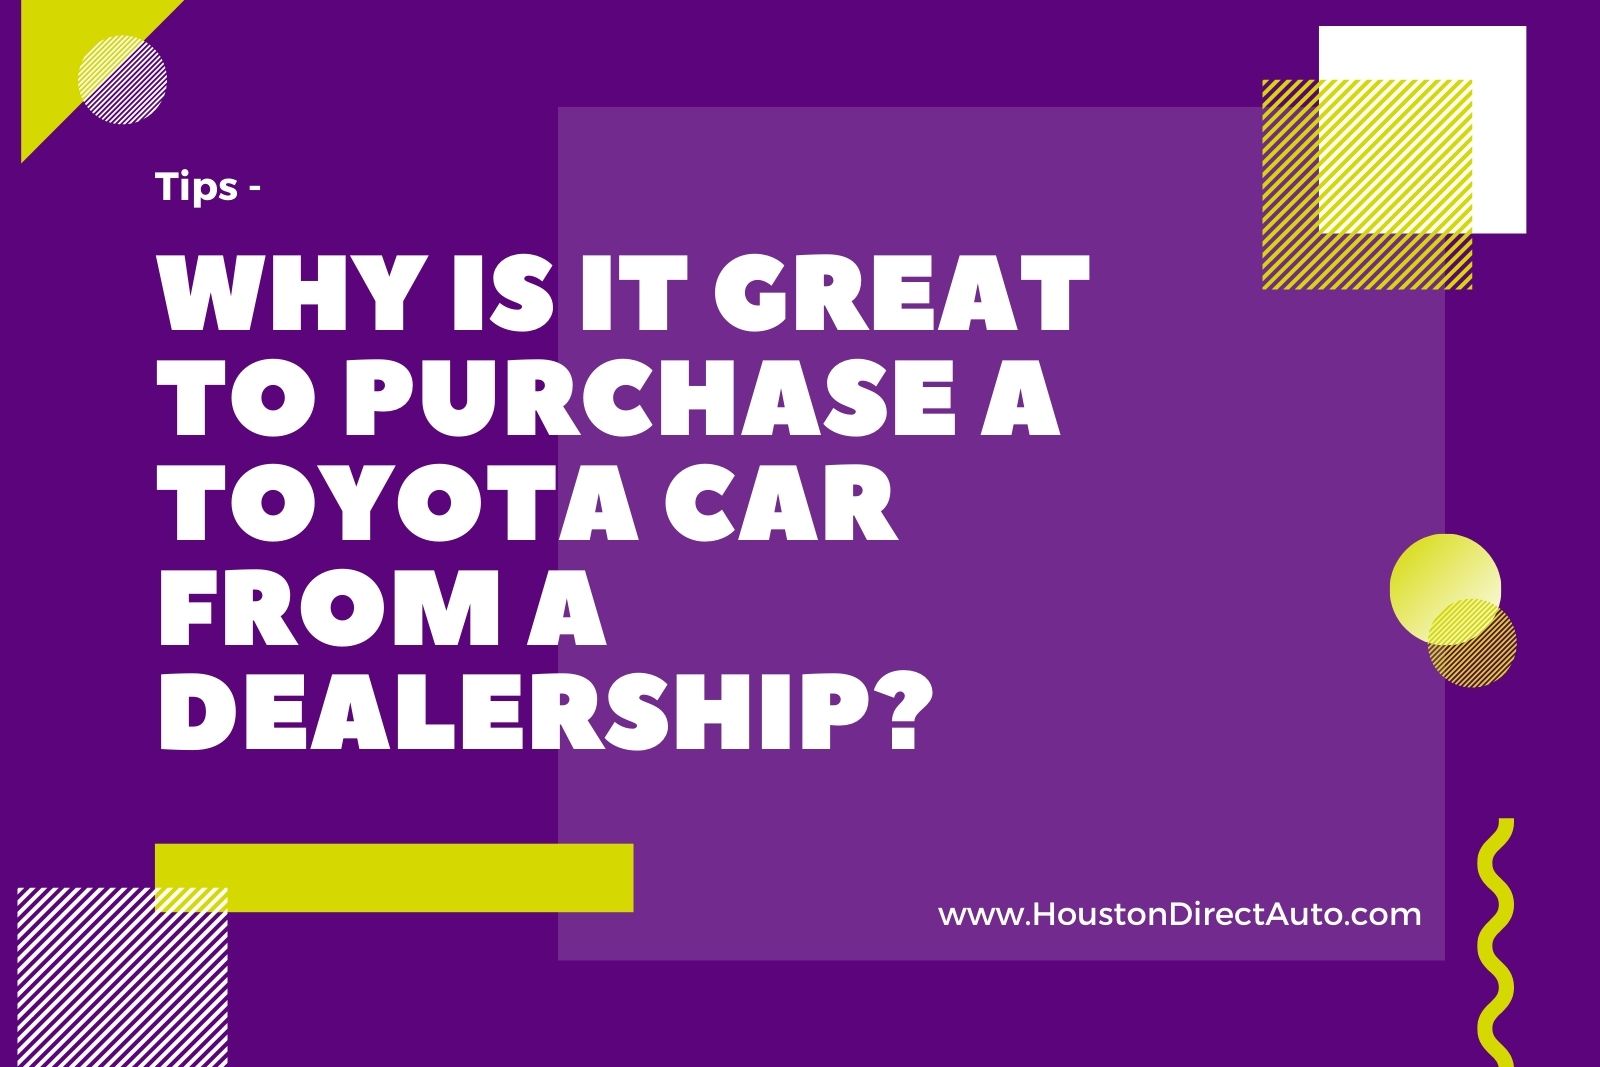 Why Is It Great To Purchase A Toyota Car From A Dealership?